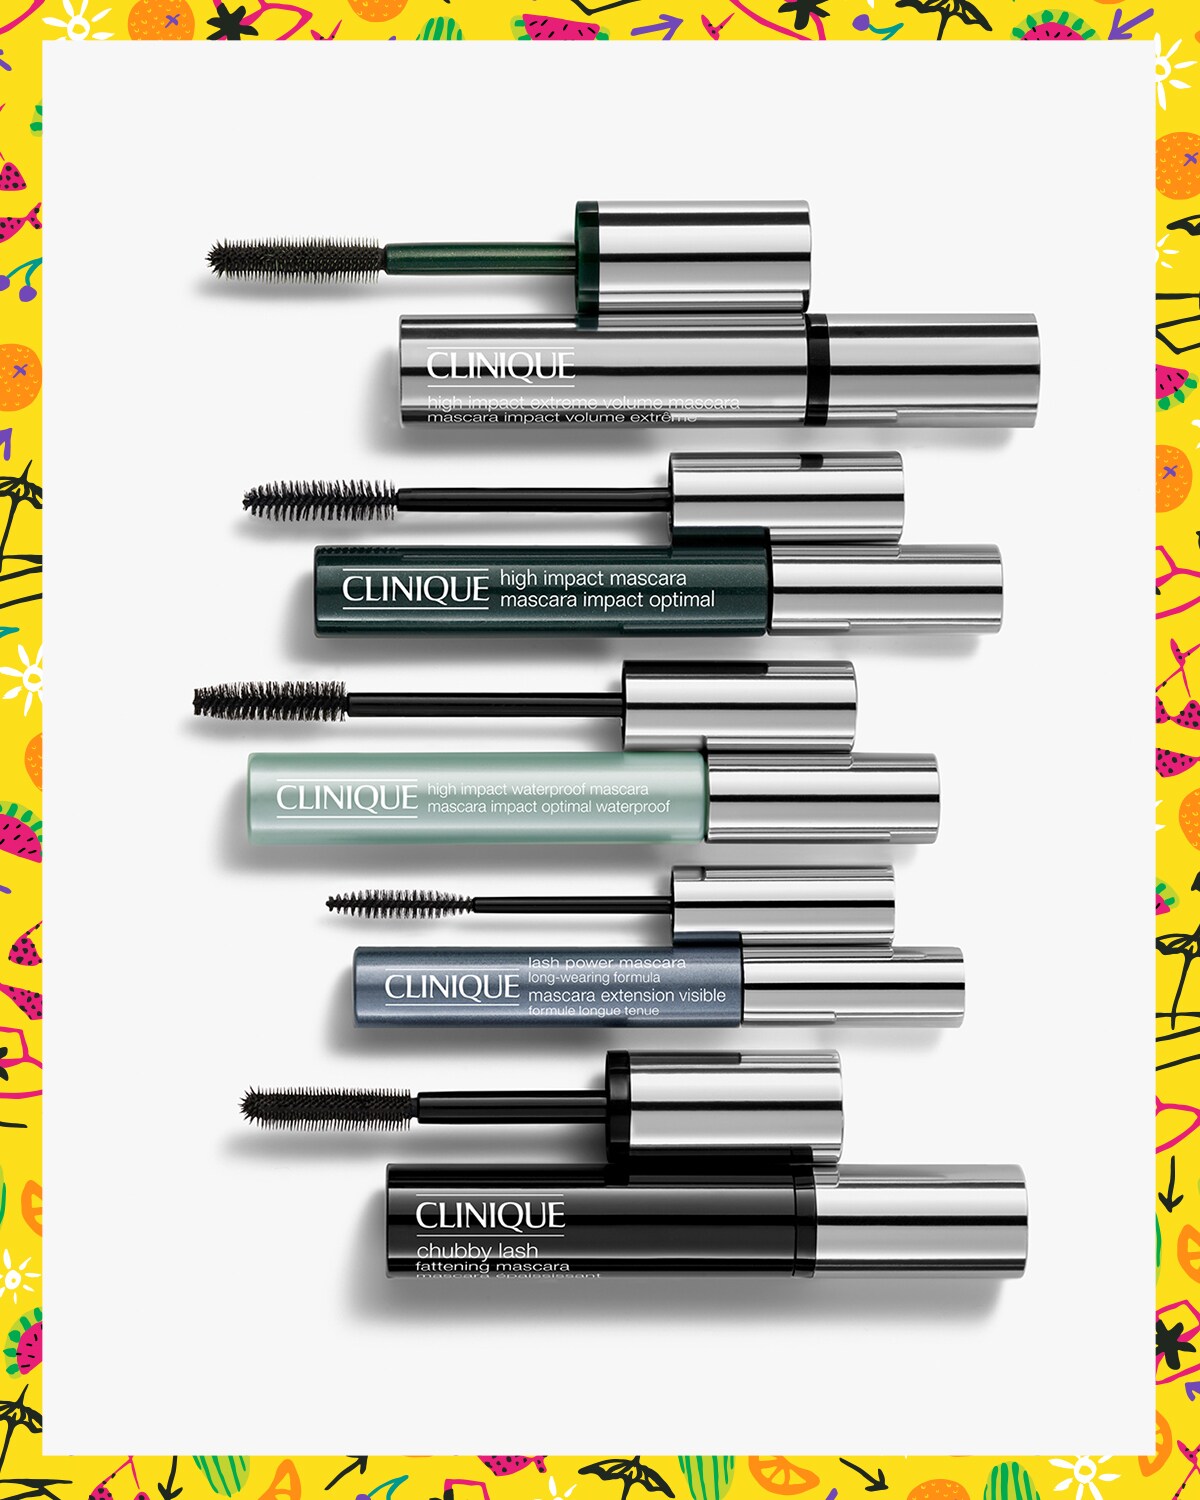 Summer is coming get your lash on!